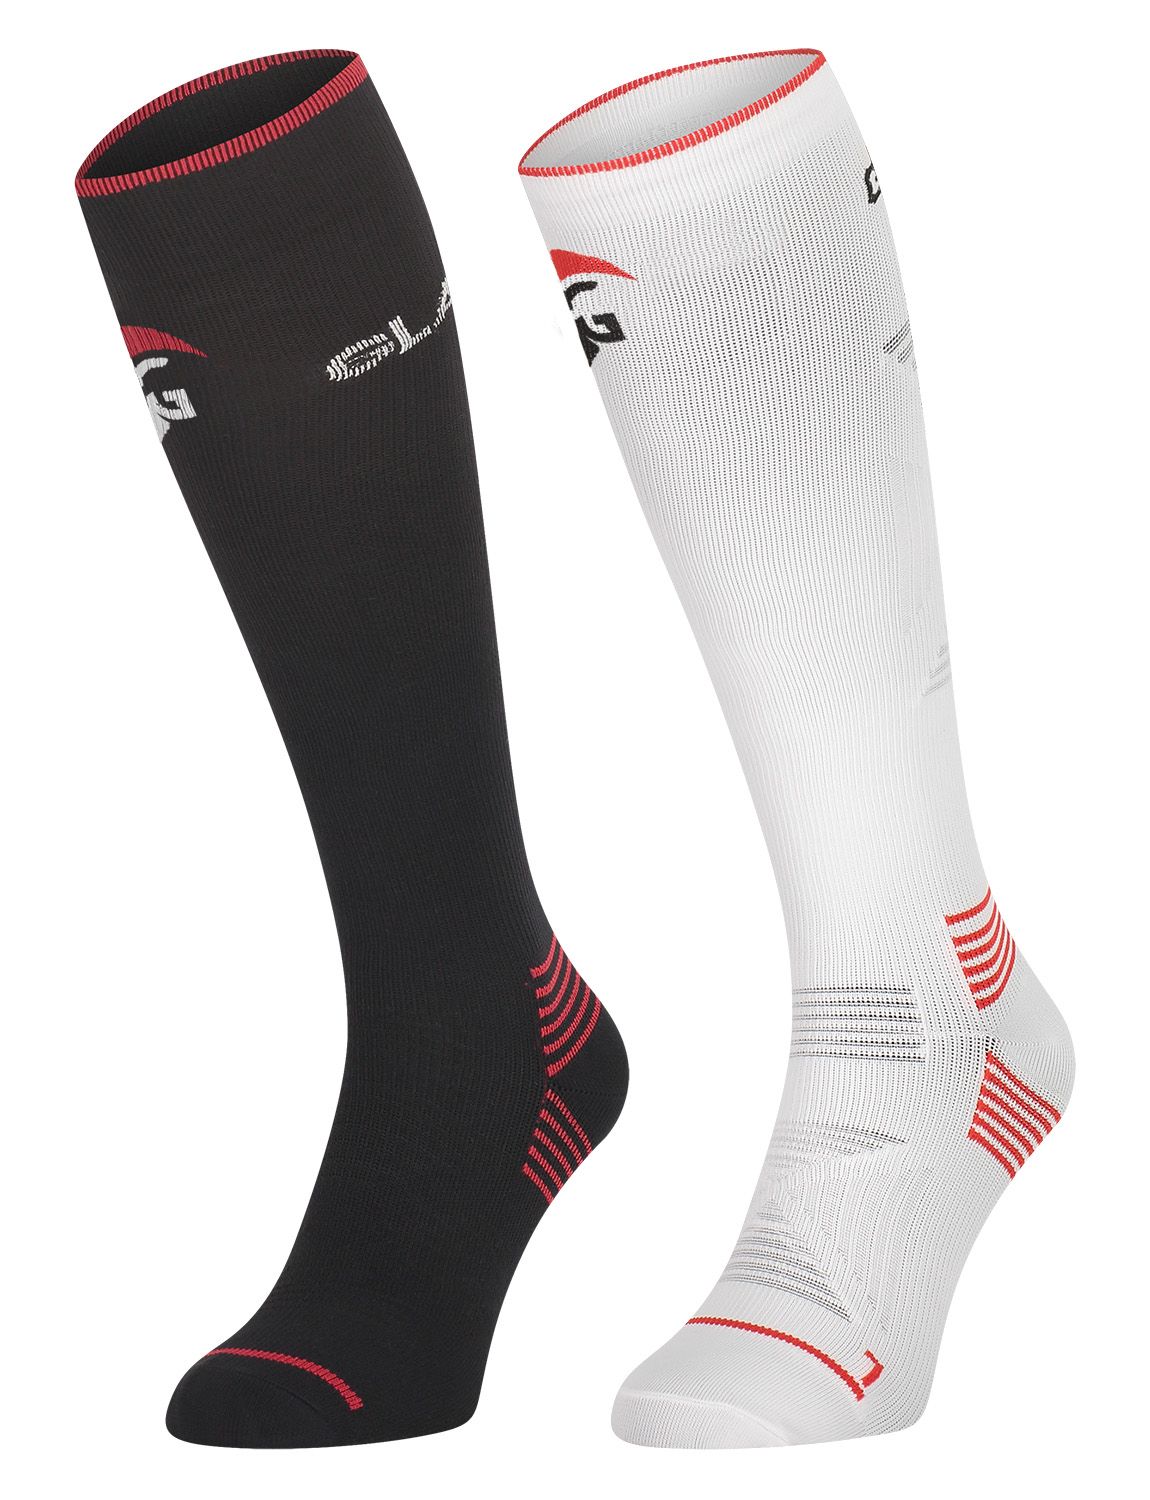 gladiator sports compression stockings for sale